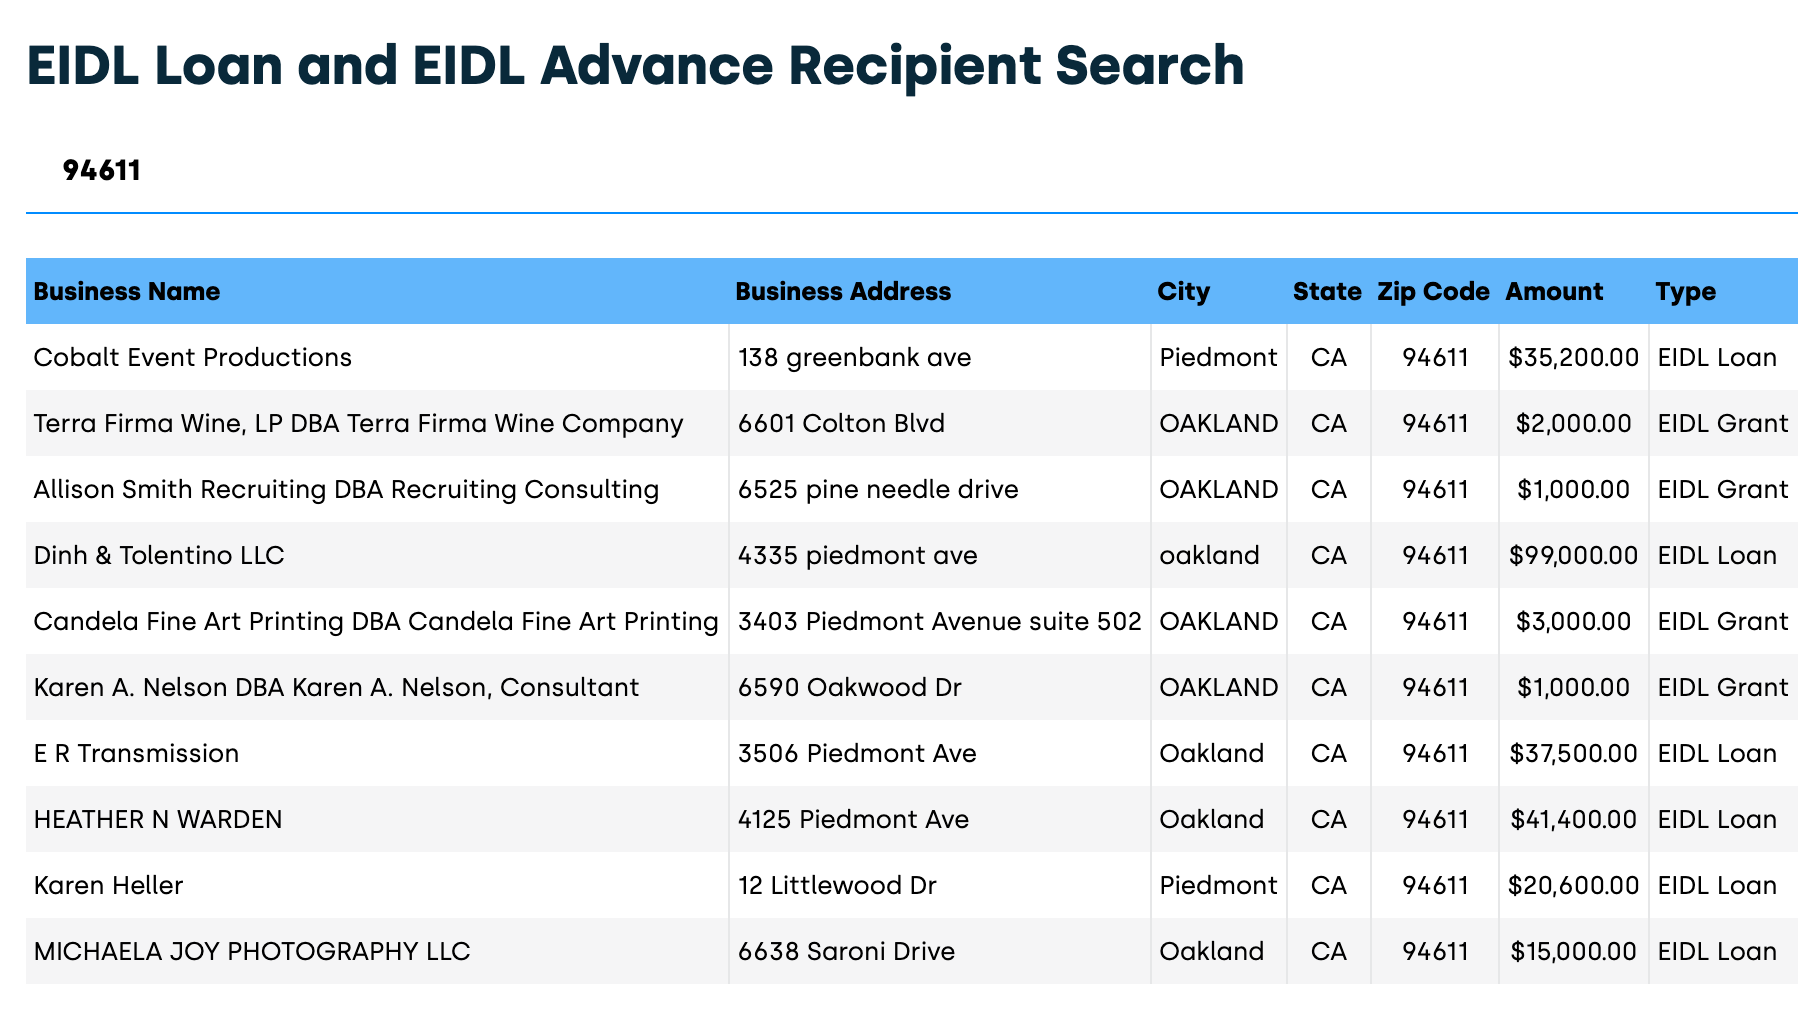 https://static.helloskip.com/blog/2021/05/EIDL-loan-and-grant-recipient-search-1.png